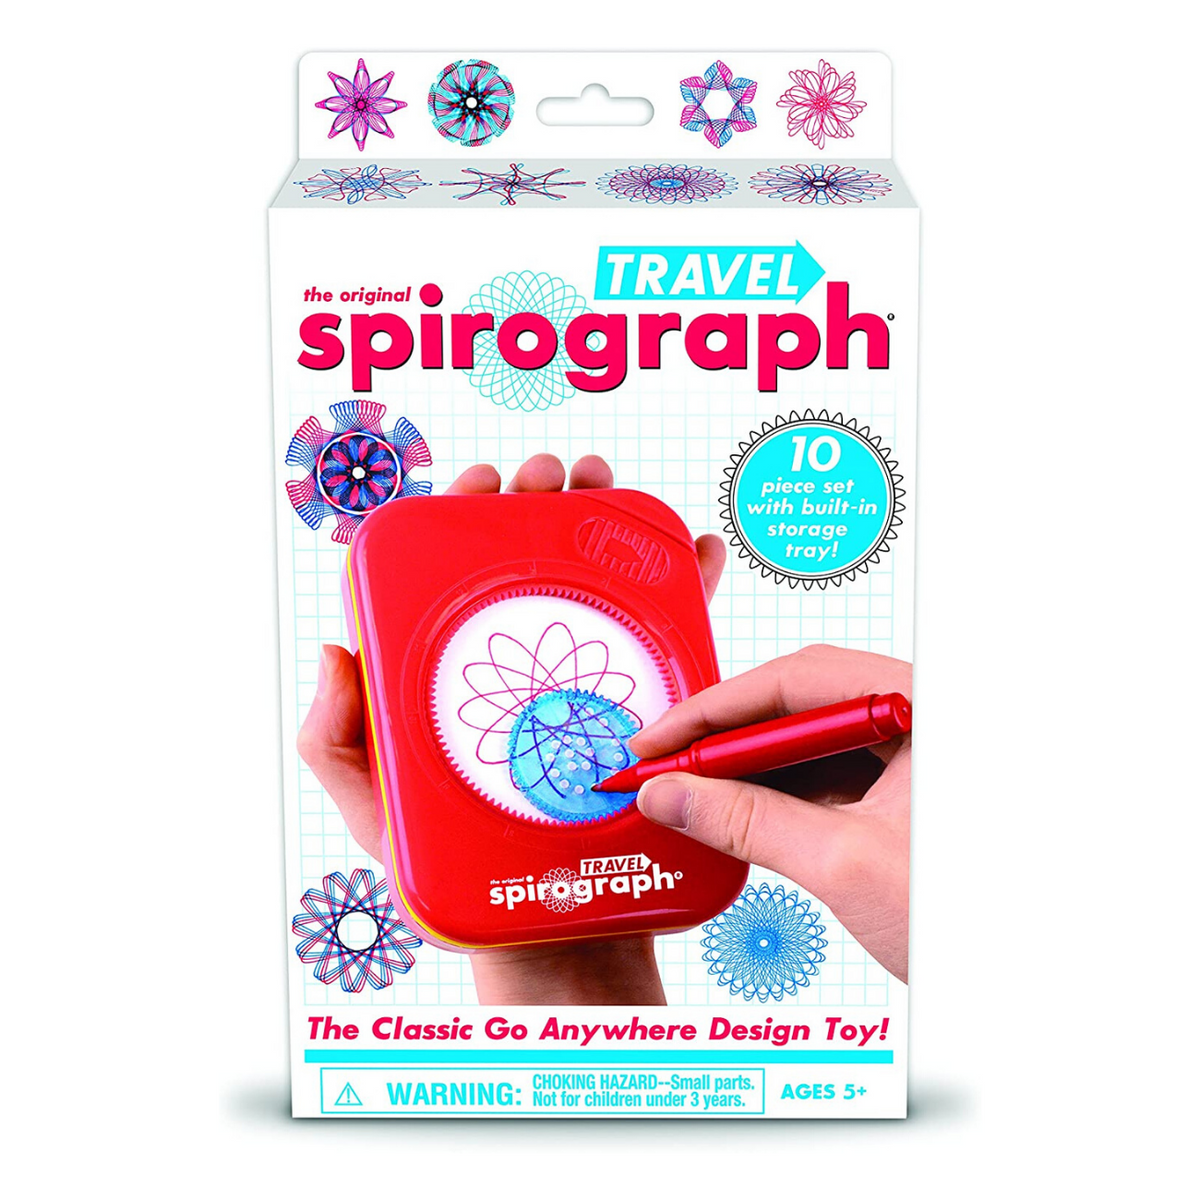 Spirograph Maker Kids Drawing Set-The Easy Way to Make Countless